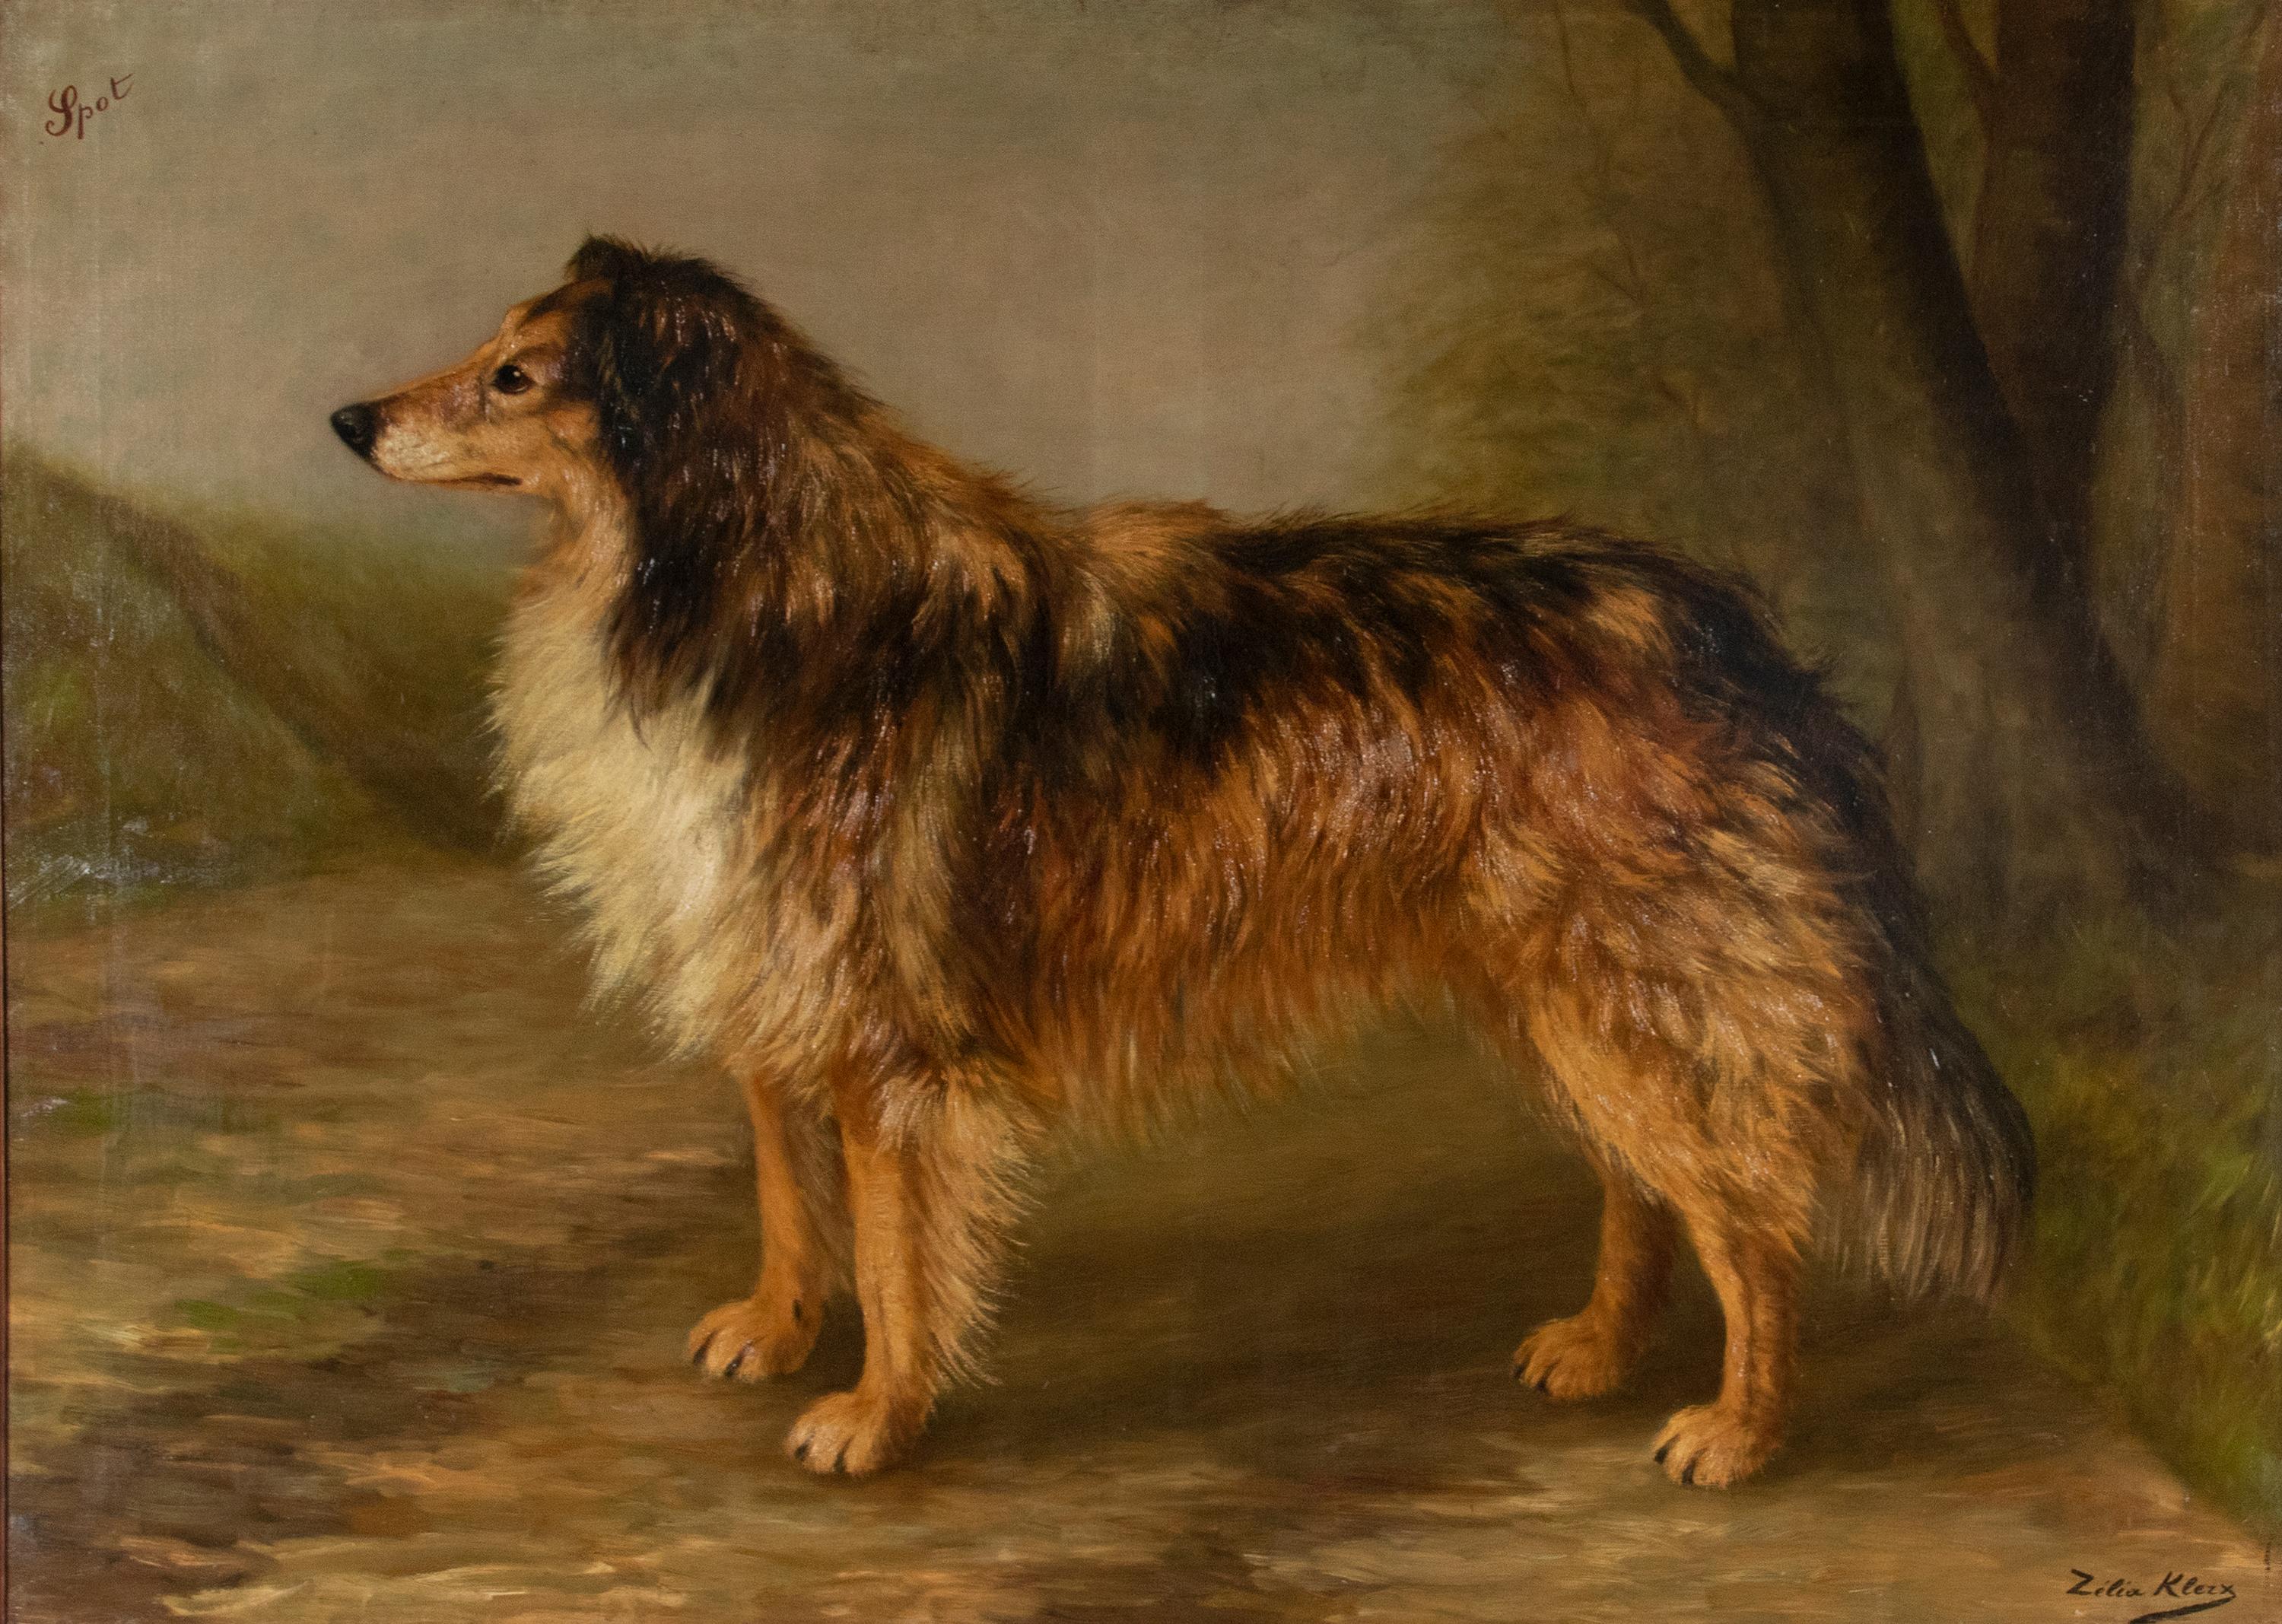 Beautiful antique painting, it is a dog portrait of a Scottish Collie. It is a large and impressive painting. The painting is very nicely painted, the dog's fur, the colors and the dog's posture look lifelike. The painting is signed Zélia Klerx, she